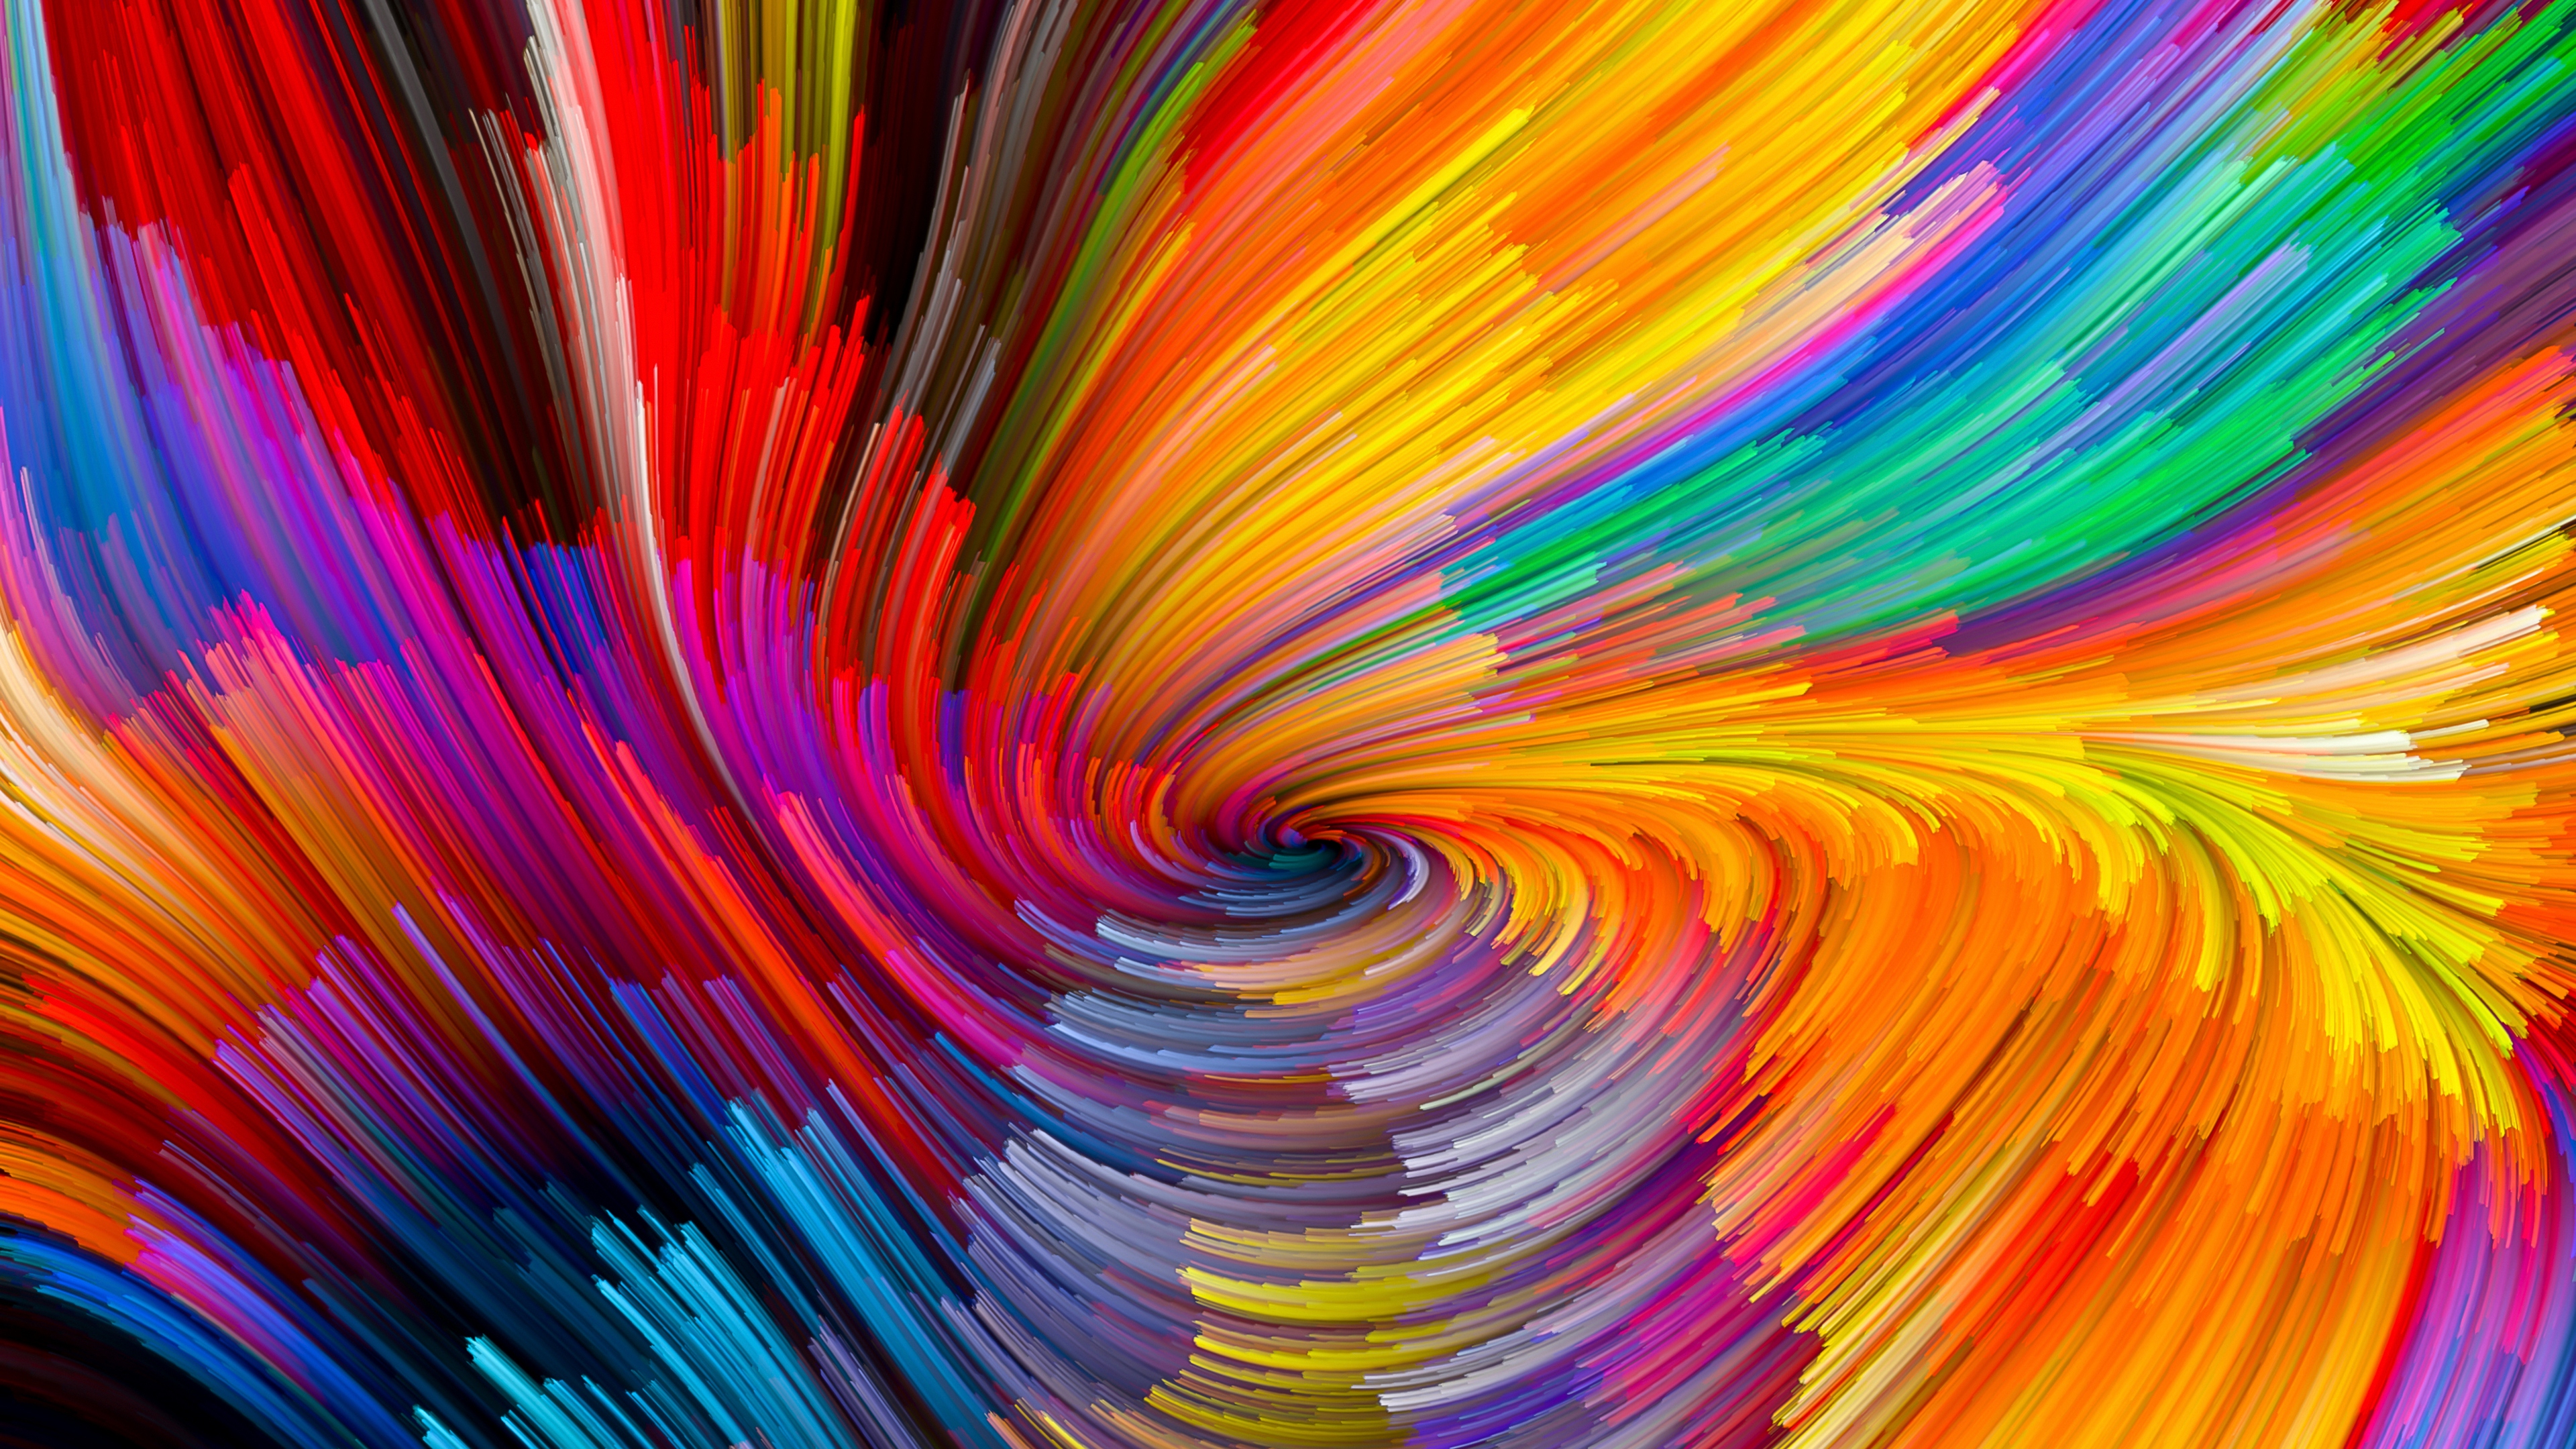 Spiral Colorful Artwork Abstract 3840x2160